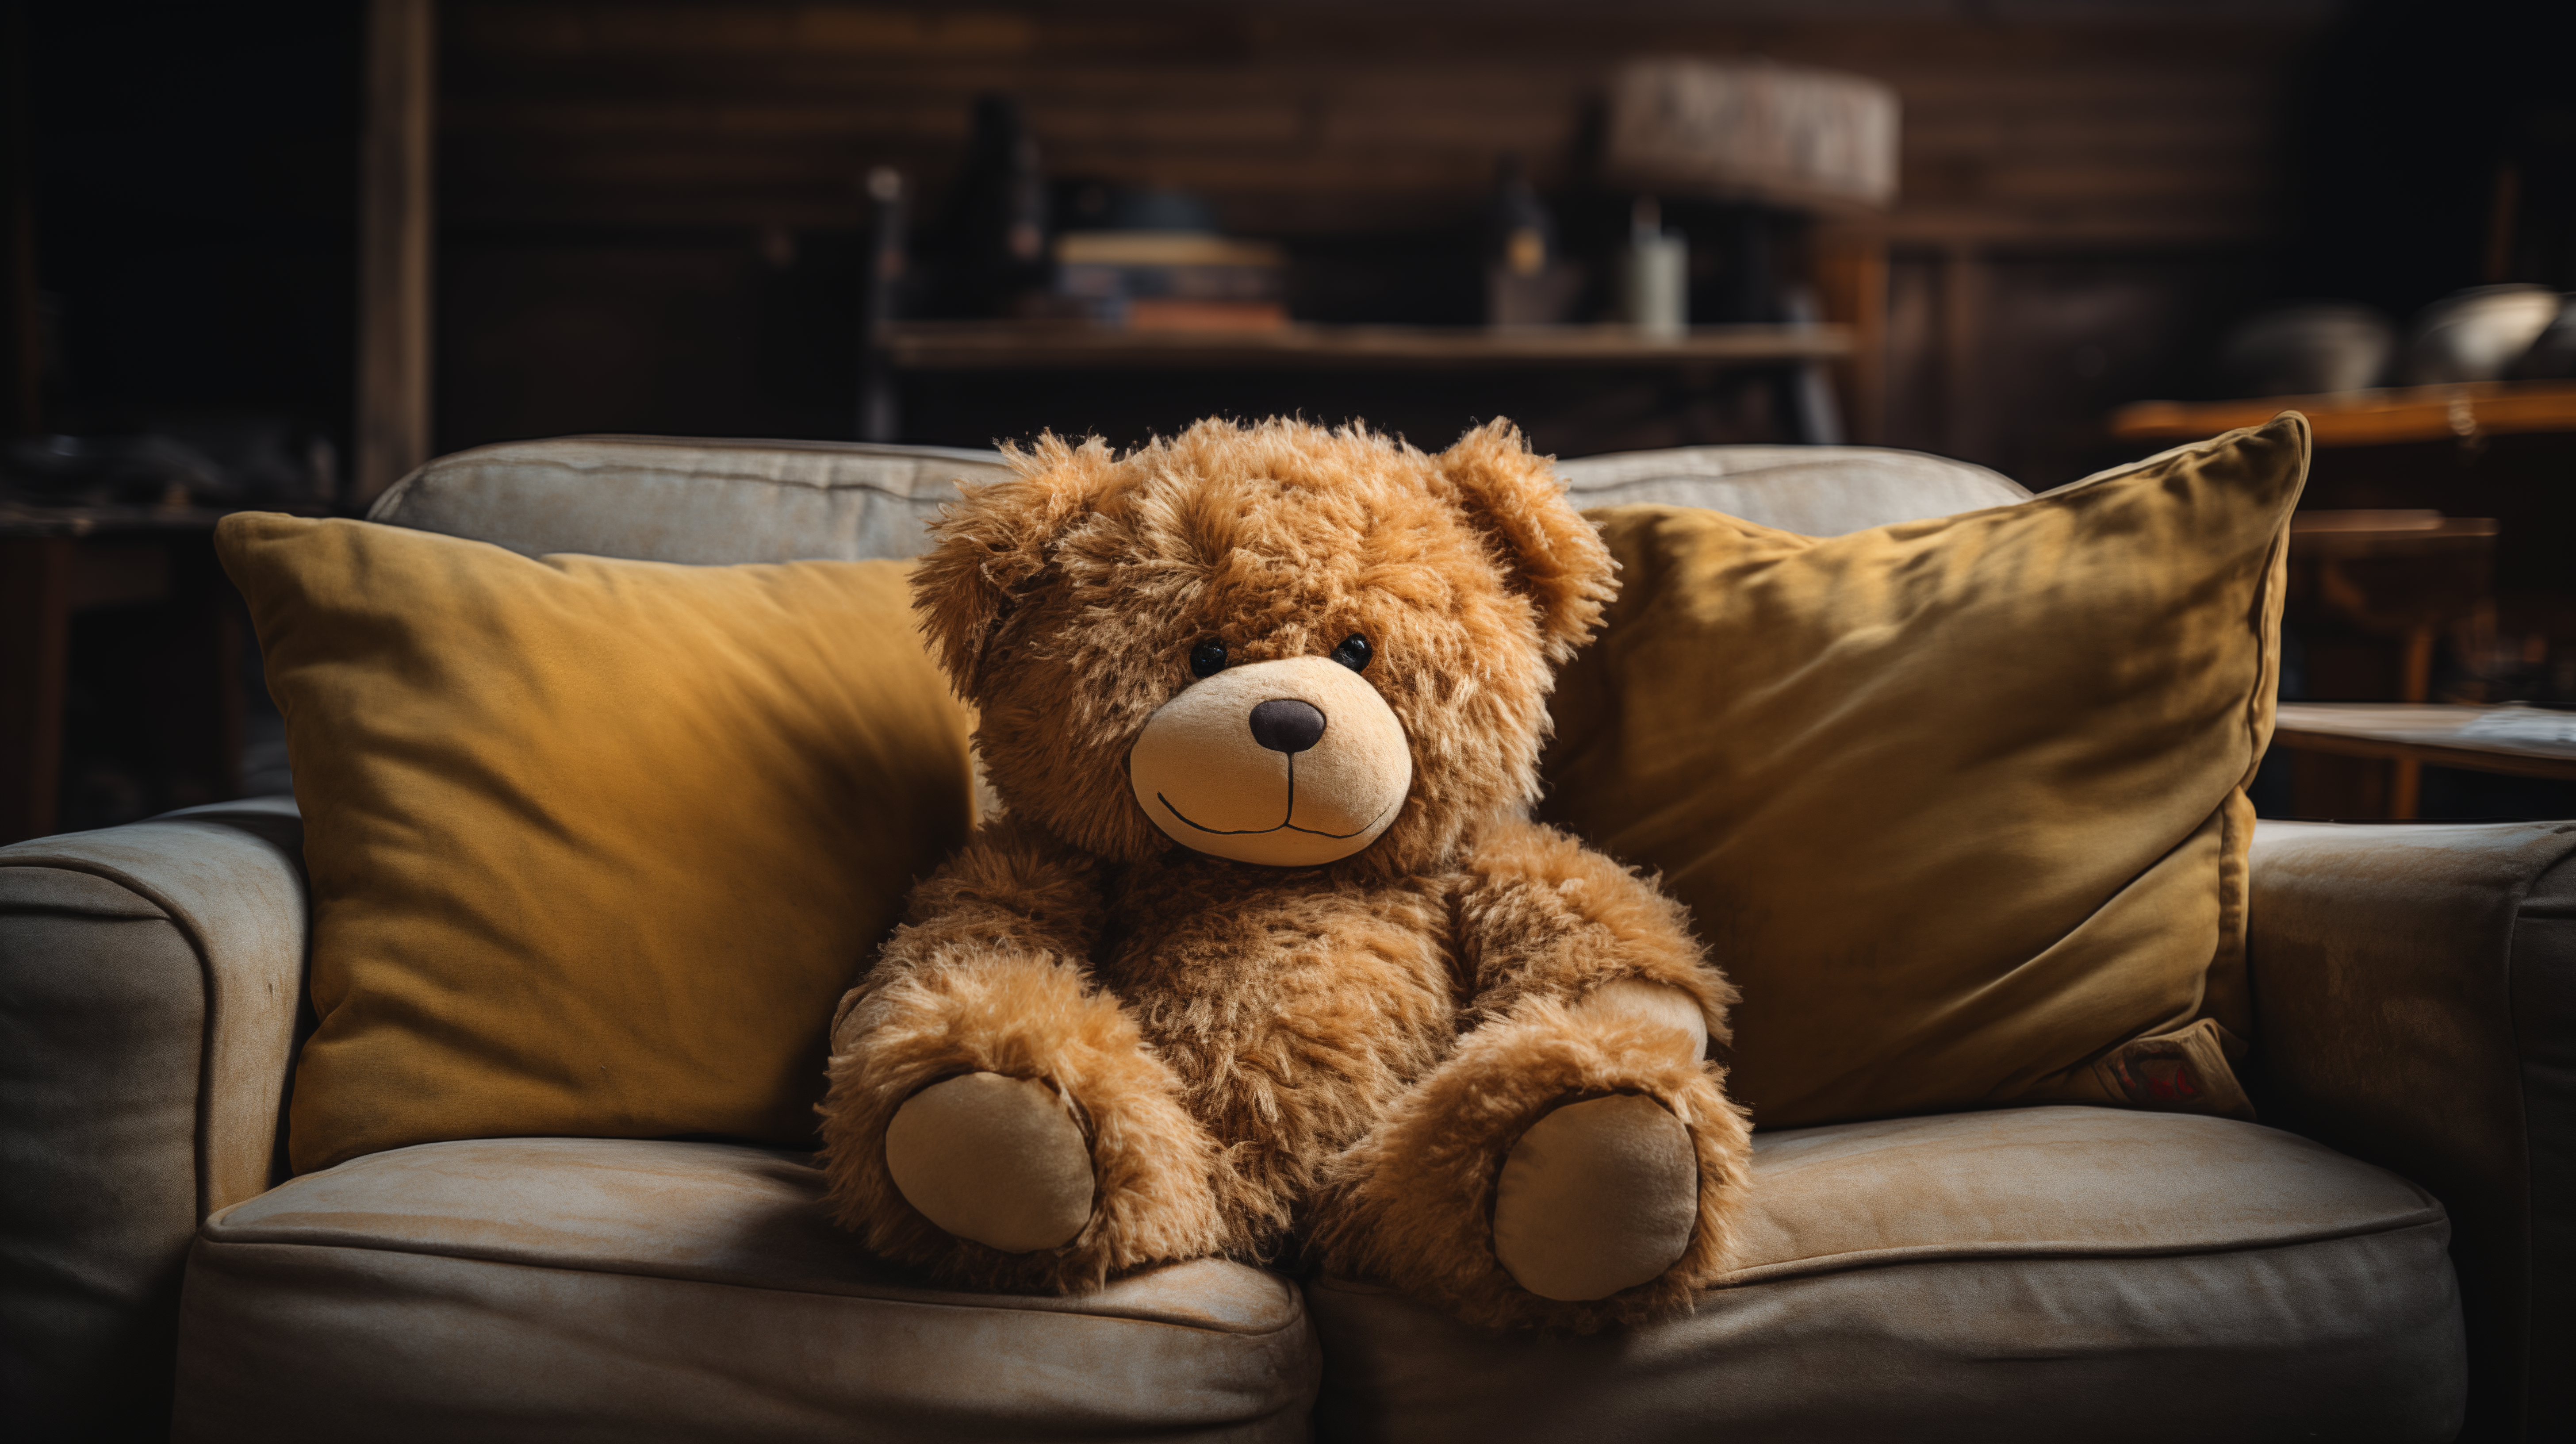 Cozy HD wallpaper of a fluffy teddy bear seated on a couch with yellow cushions, perfect for a warm desktop background.